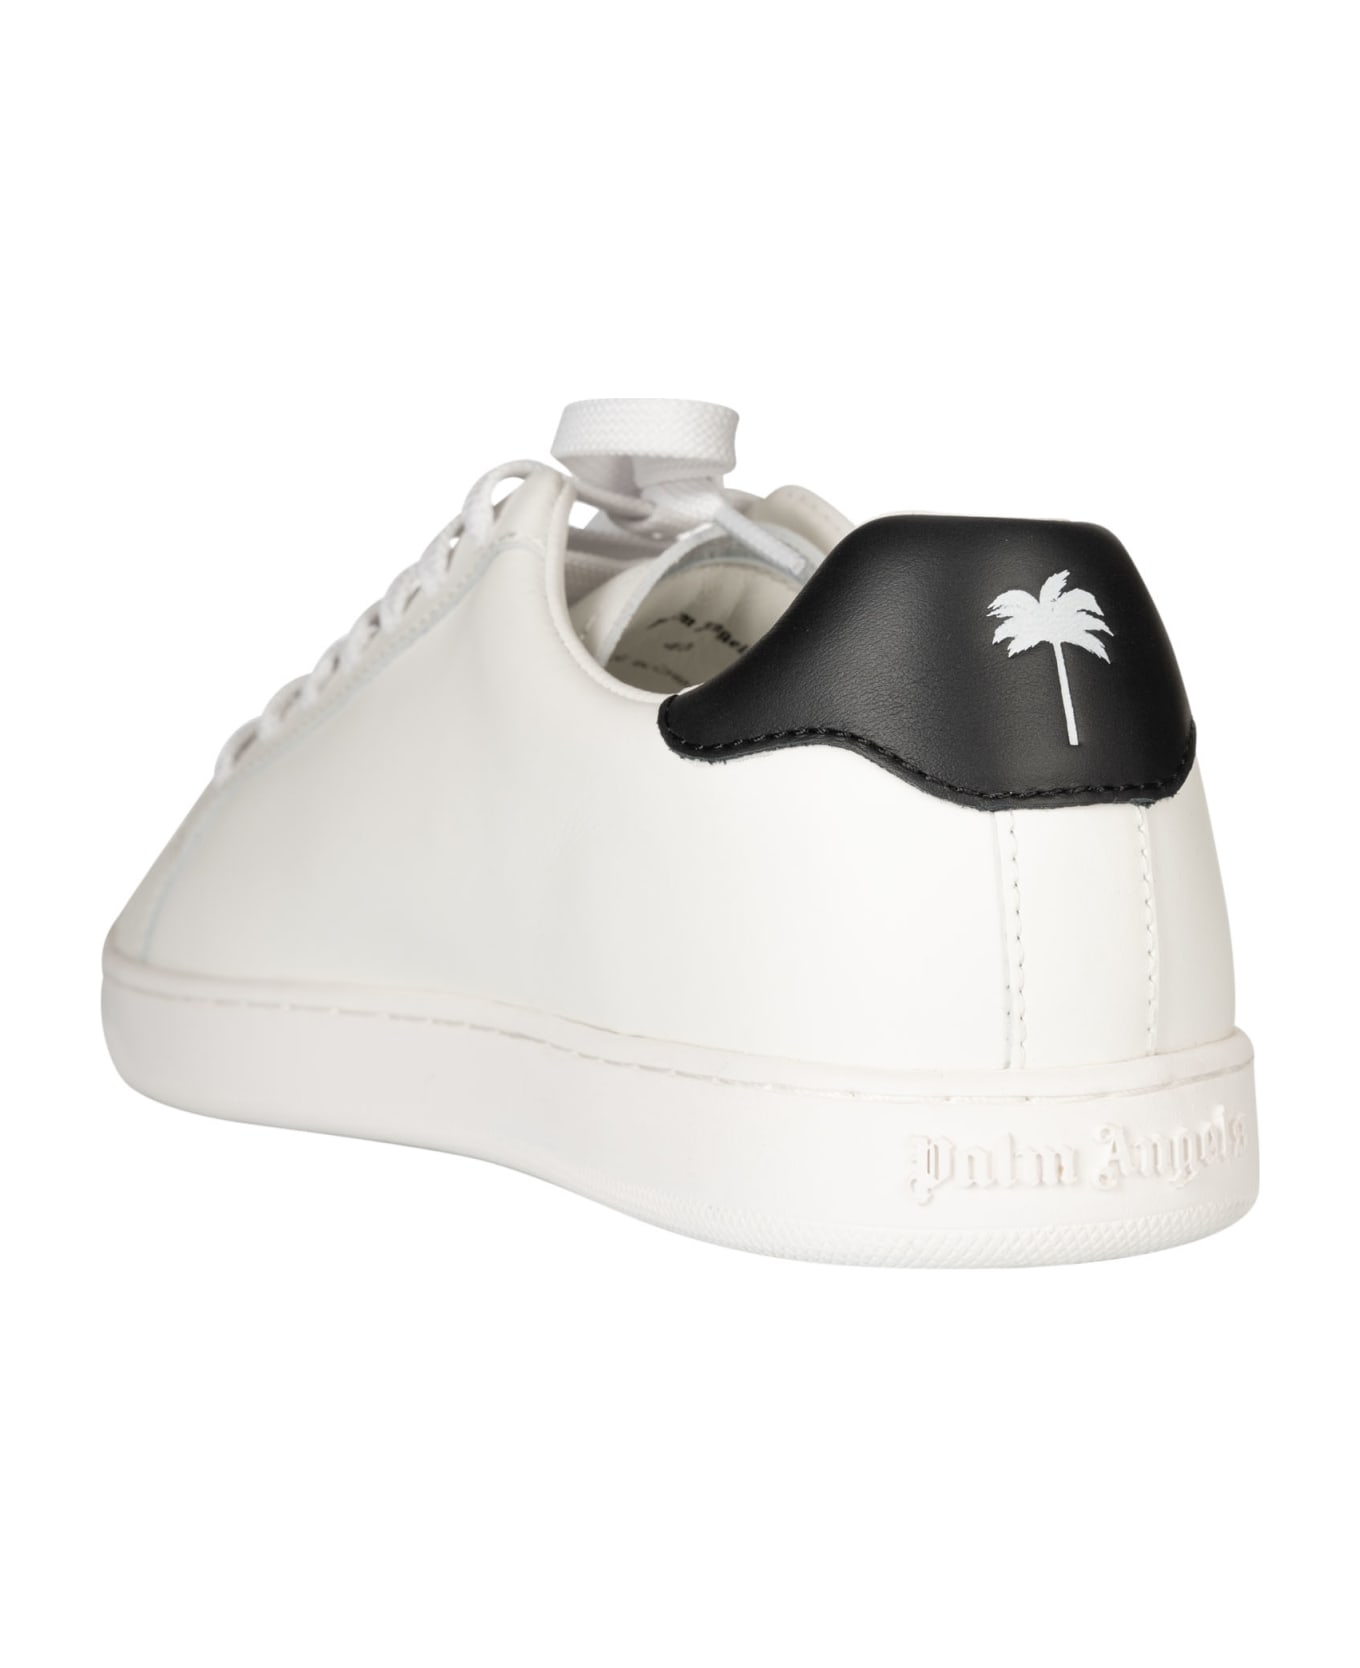 Palm Angels New Tennis Sneakers - Bianco/nero スニーカー